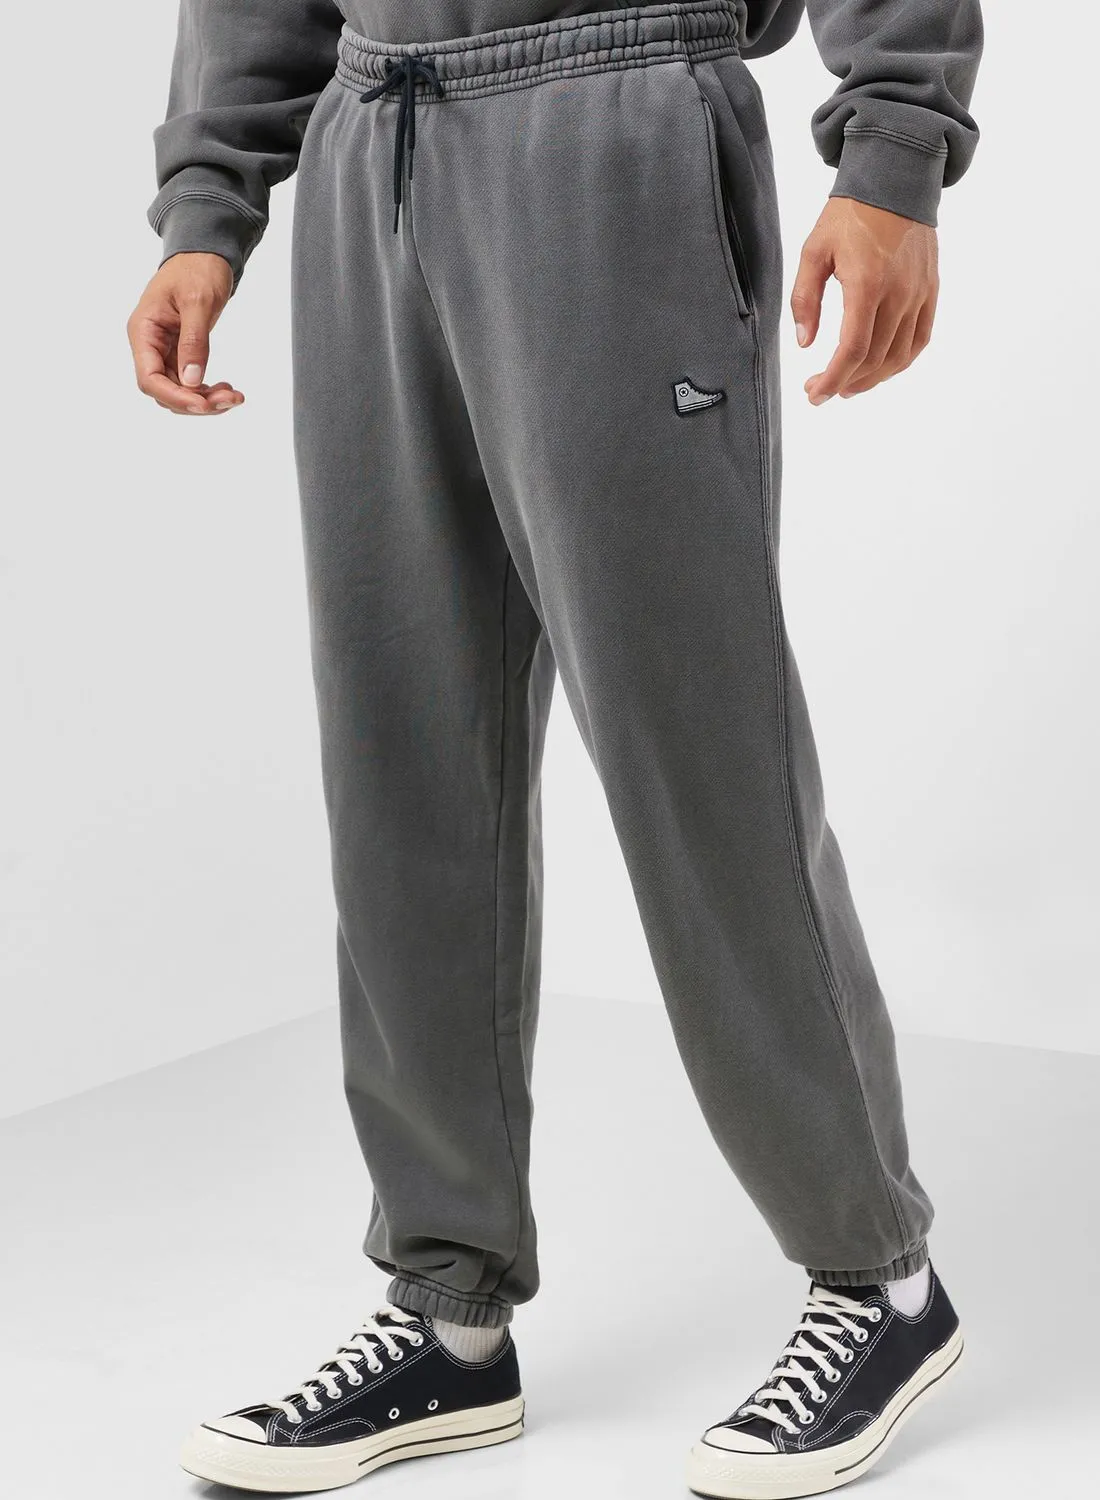 CONVERSE Go-To Sneaker Patch Loose-Fit Sweatpants